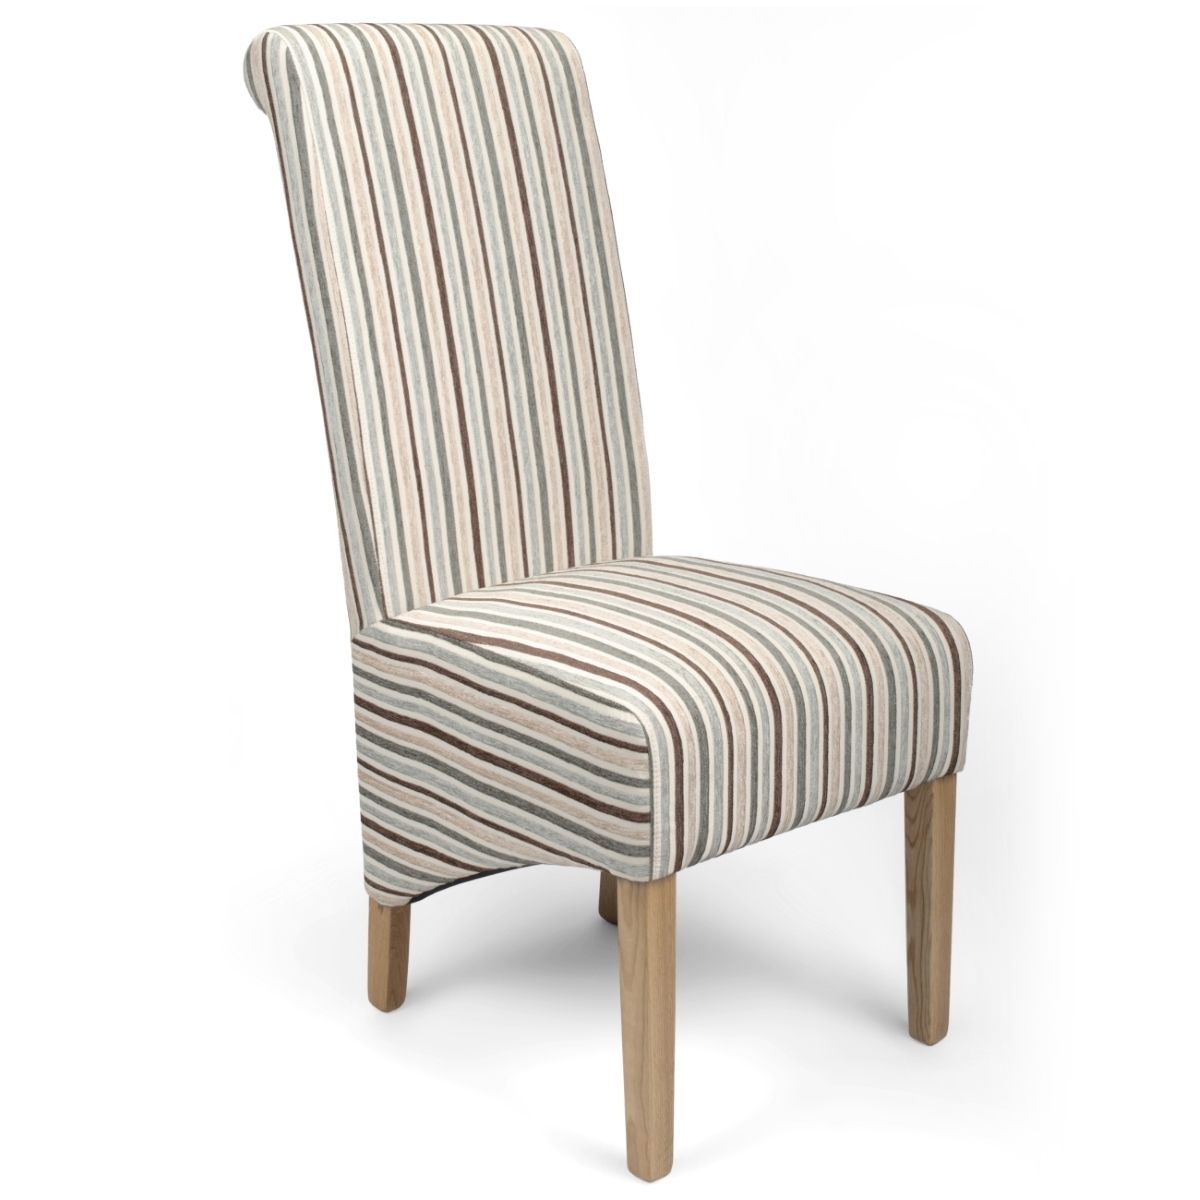 2018 Dining Chairs – Krista Stripe Dining Chairs In Duck Egg Blue Within Blue Stripe Dining Chairs (Photo 4 of 20)